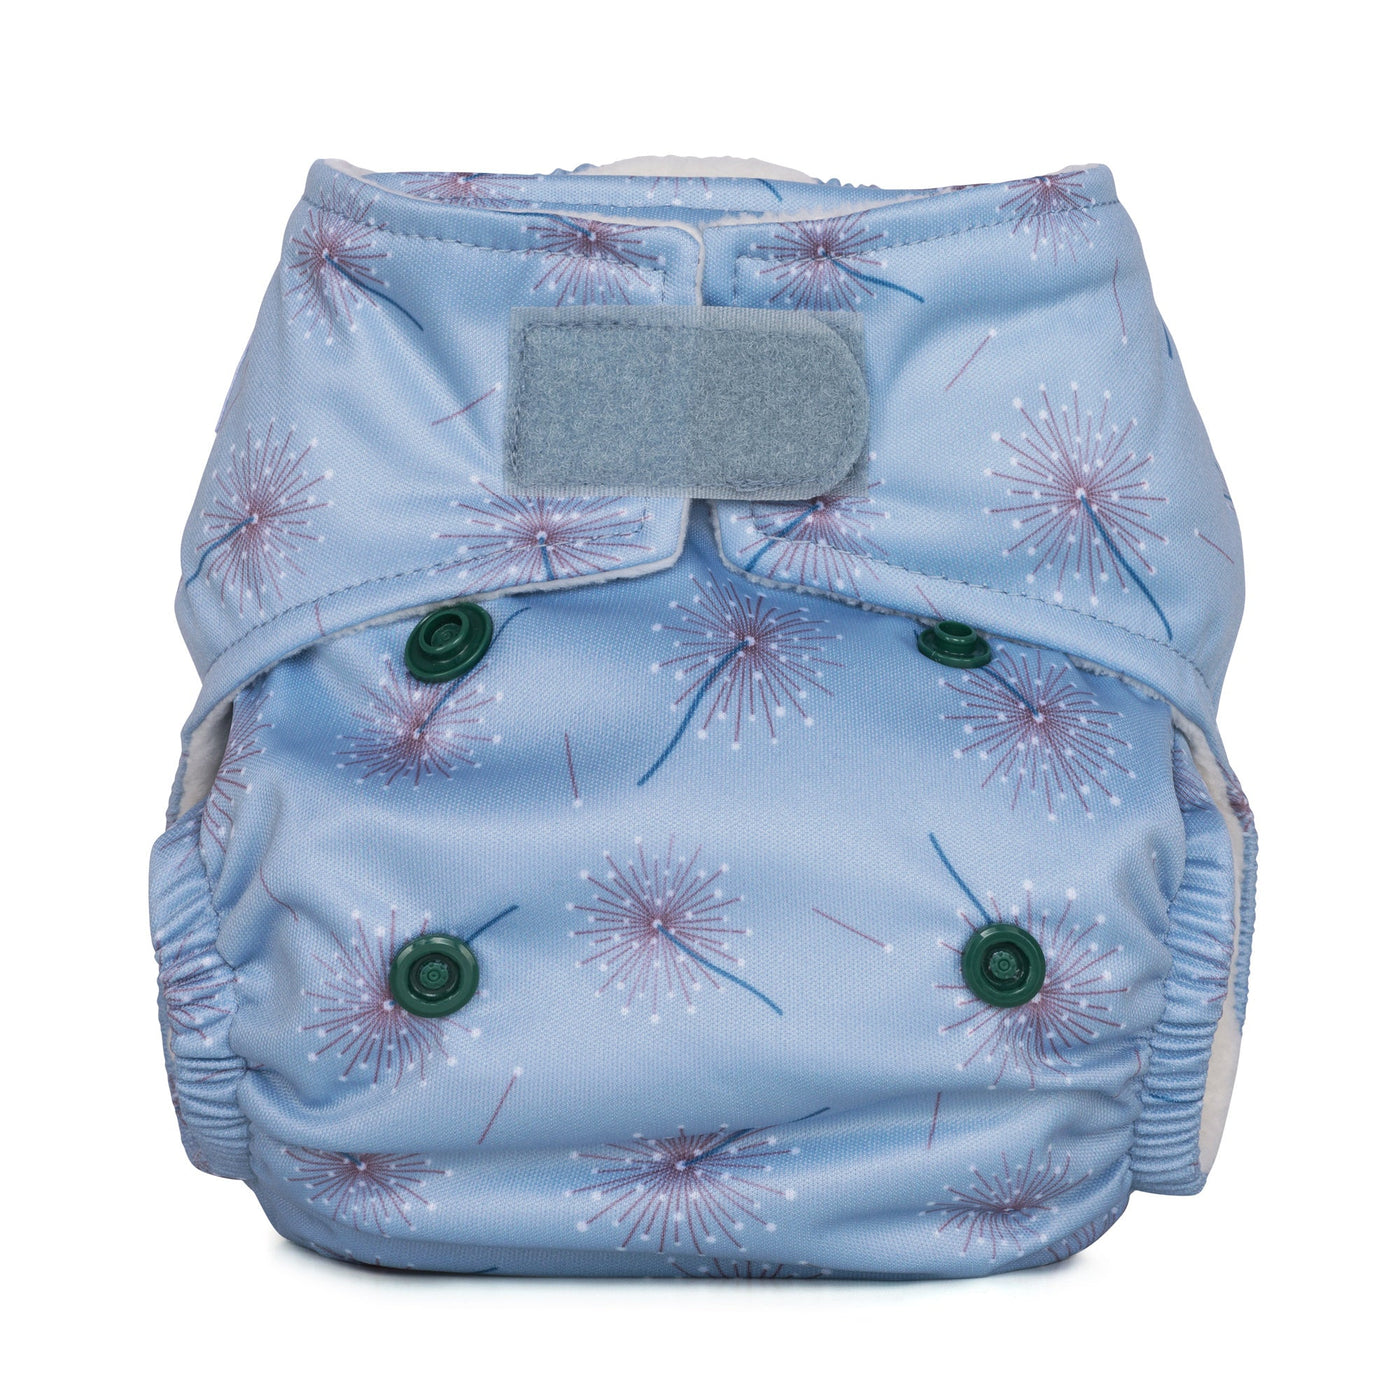 Baba + BooNewborn Reusable Nappy - PrintsColour: Pebblesreusable nappies all in one nappiesEarthlets